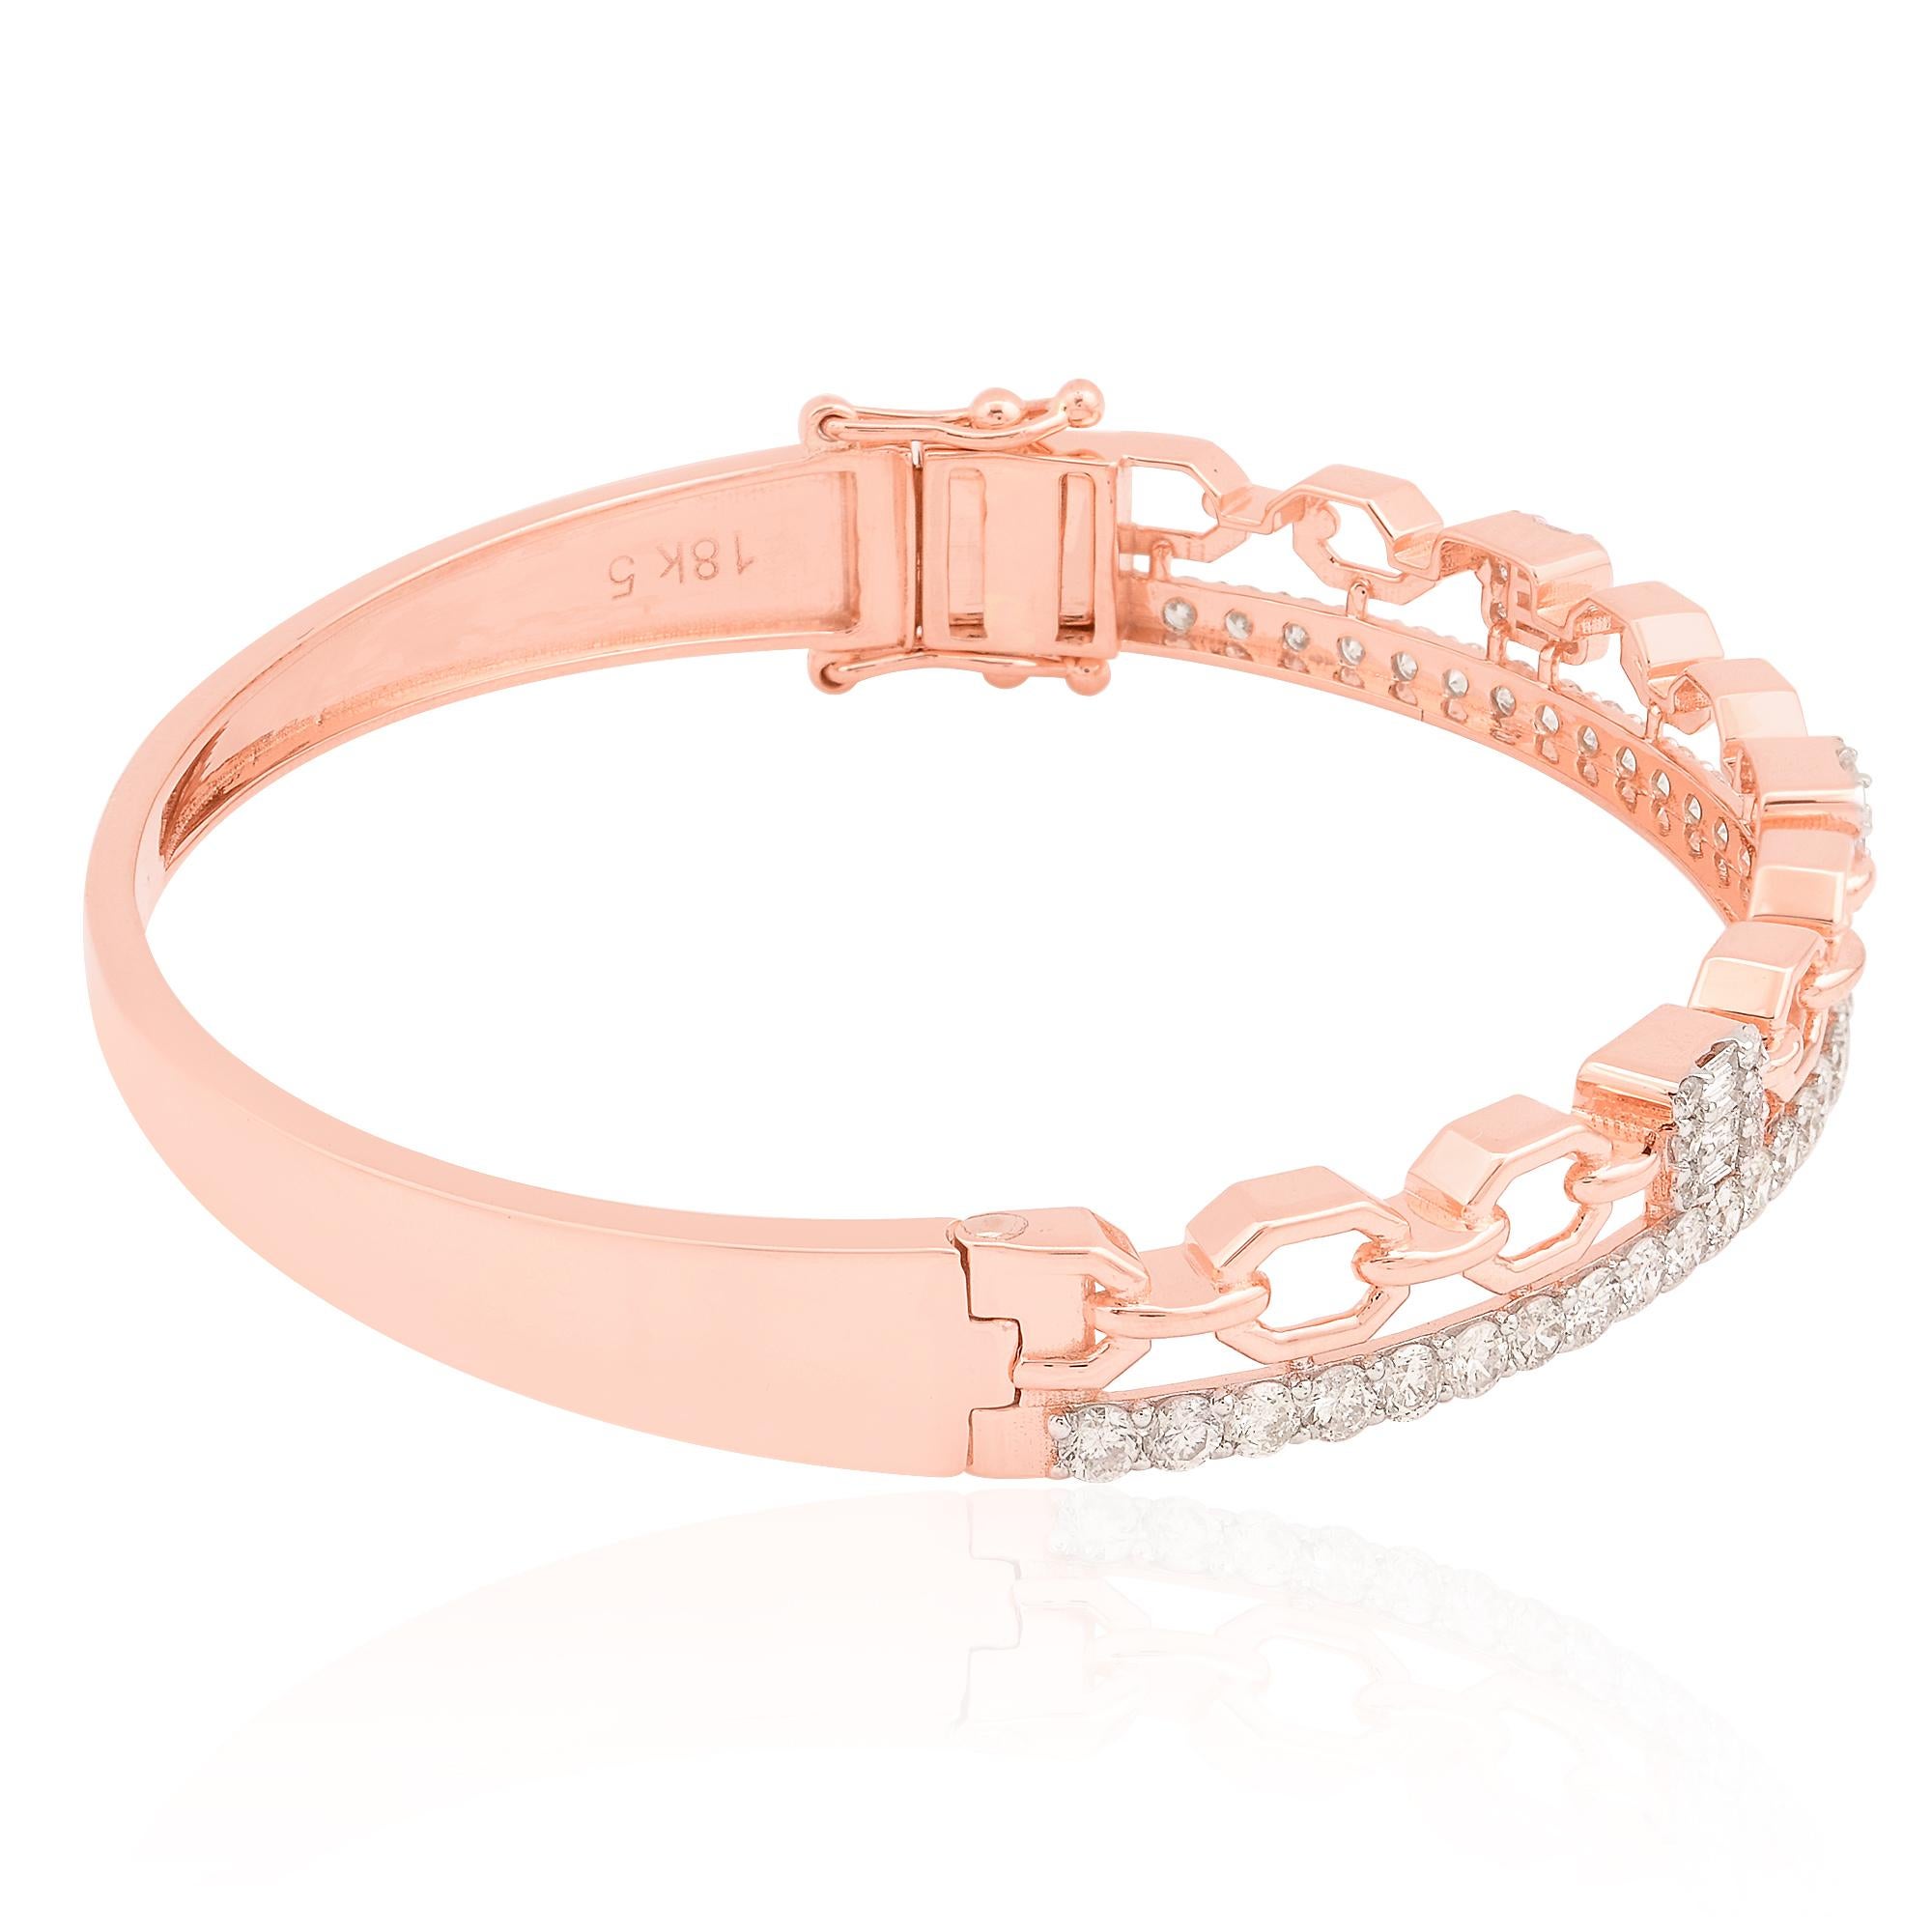 At the heart of this bracelet lies a meticulously curated selection of diamonds, expertly set to maximize their brilliance and fire. The centerpiece of the design features a striking arrangement of baguette-cut diamonds, renowned for their sleek,